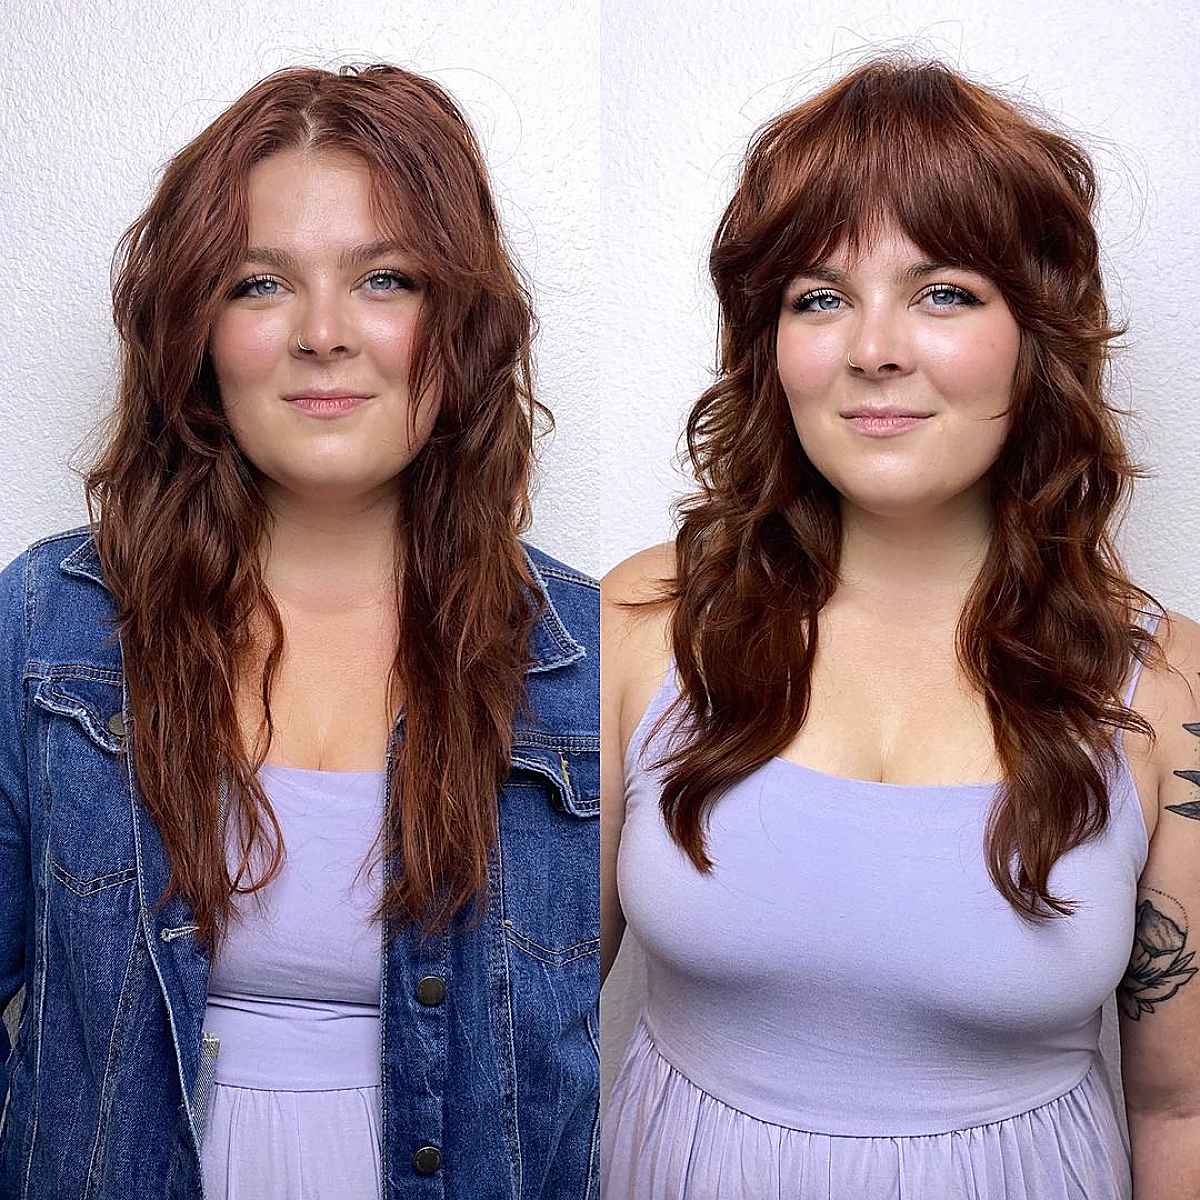 28 Slimming Hairstyles for Women with Full Faces (for Plus-Sized Women)